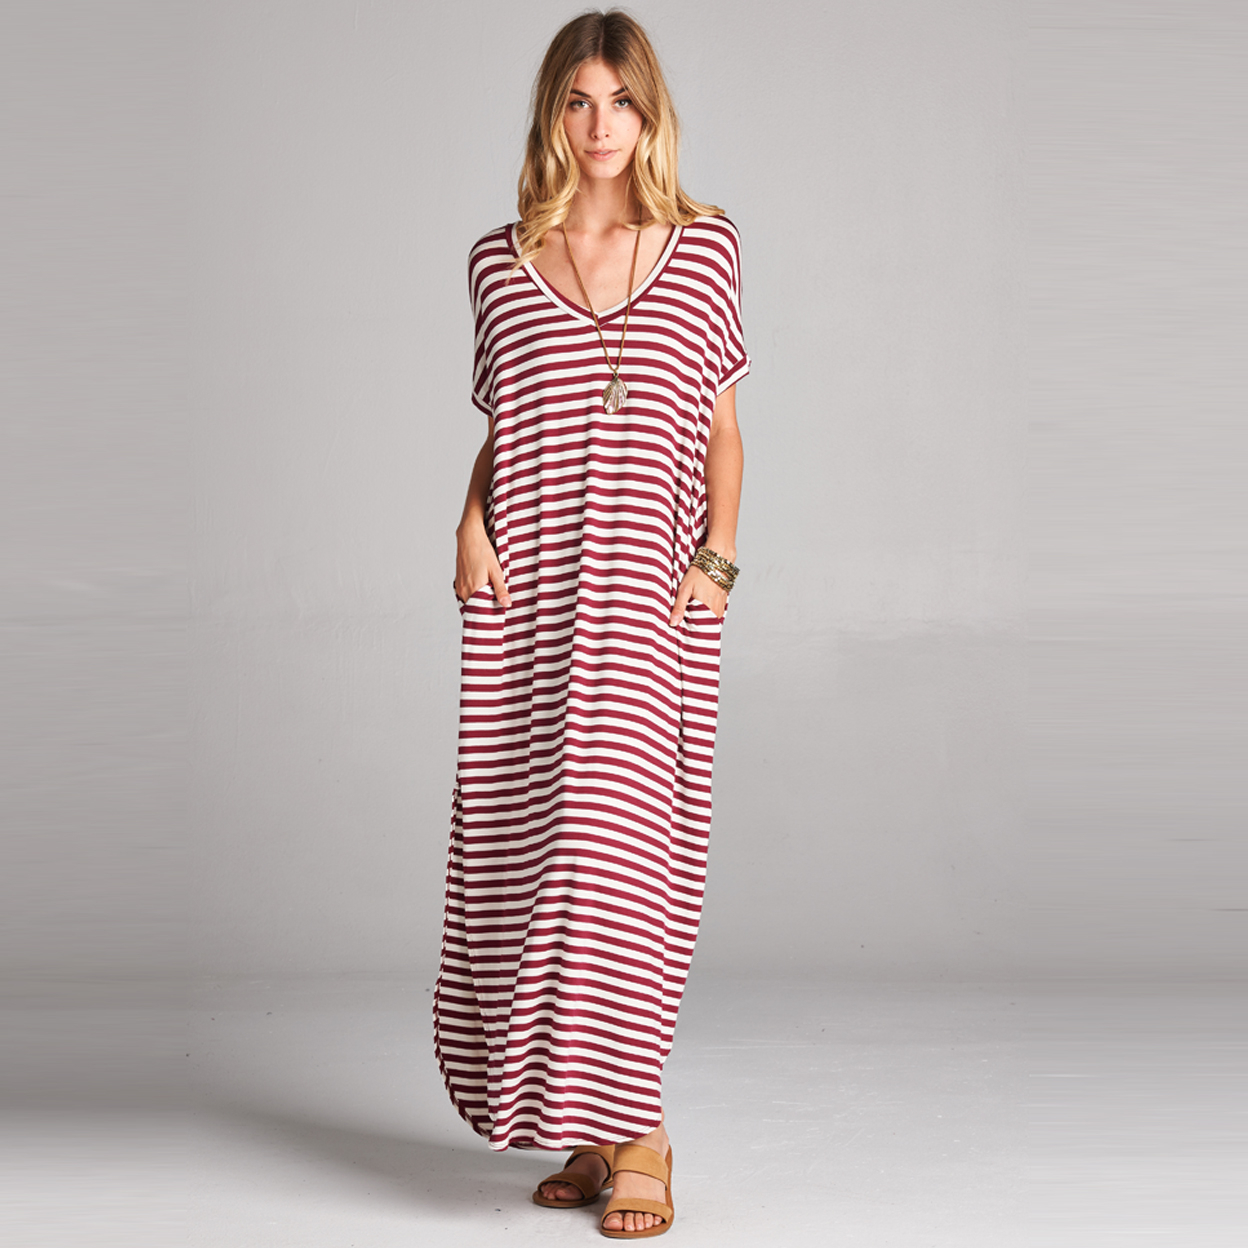 Buy Classic Stripe Maxi Dress in 8 Colors by Love Kuza Apparel on OpenSky